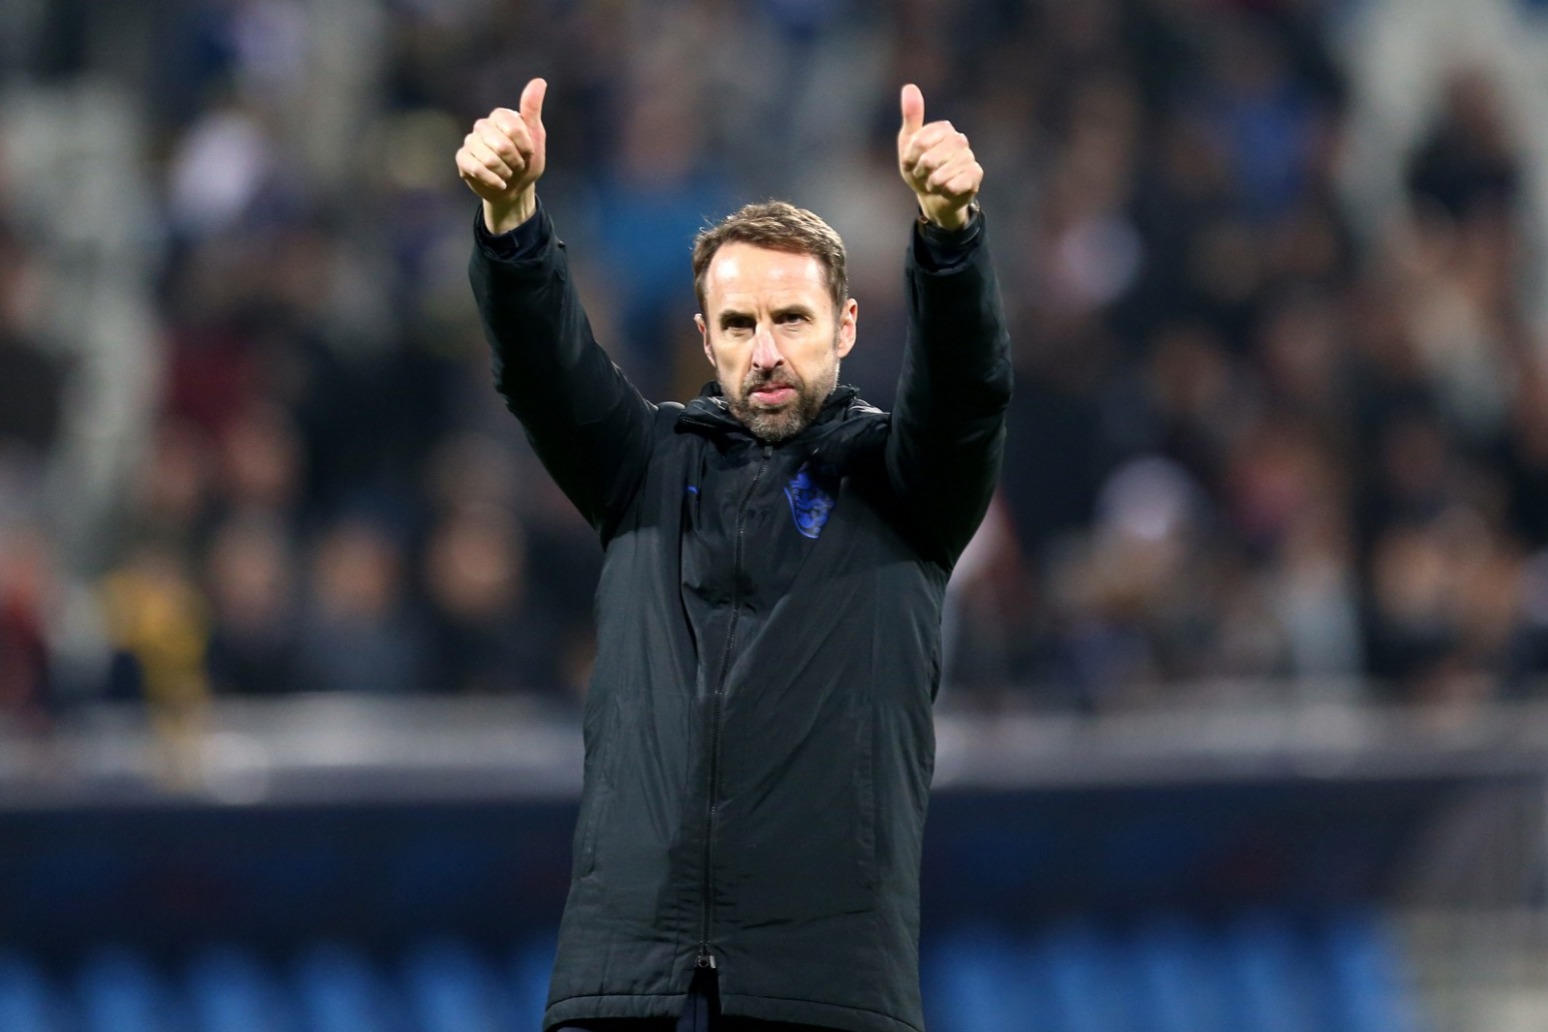 Gareth Southgate to name expanded provisional England squad for Euro 2020 